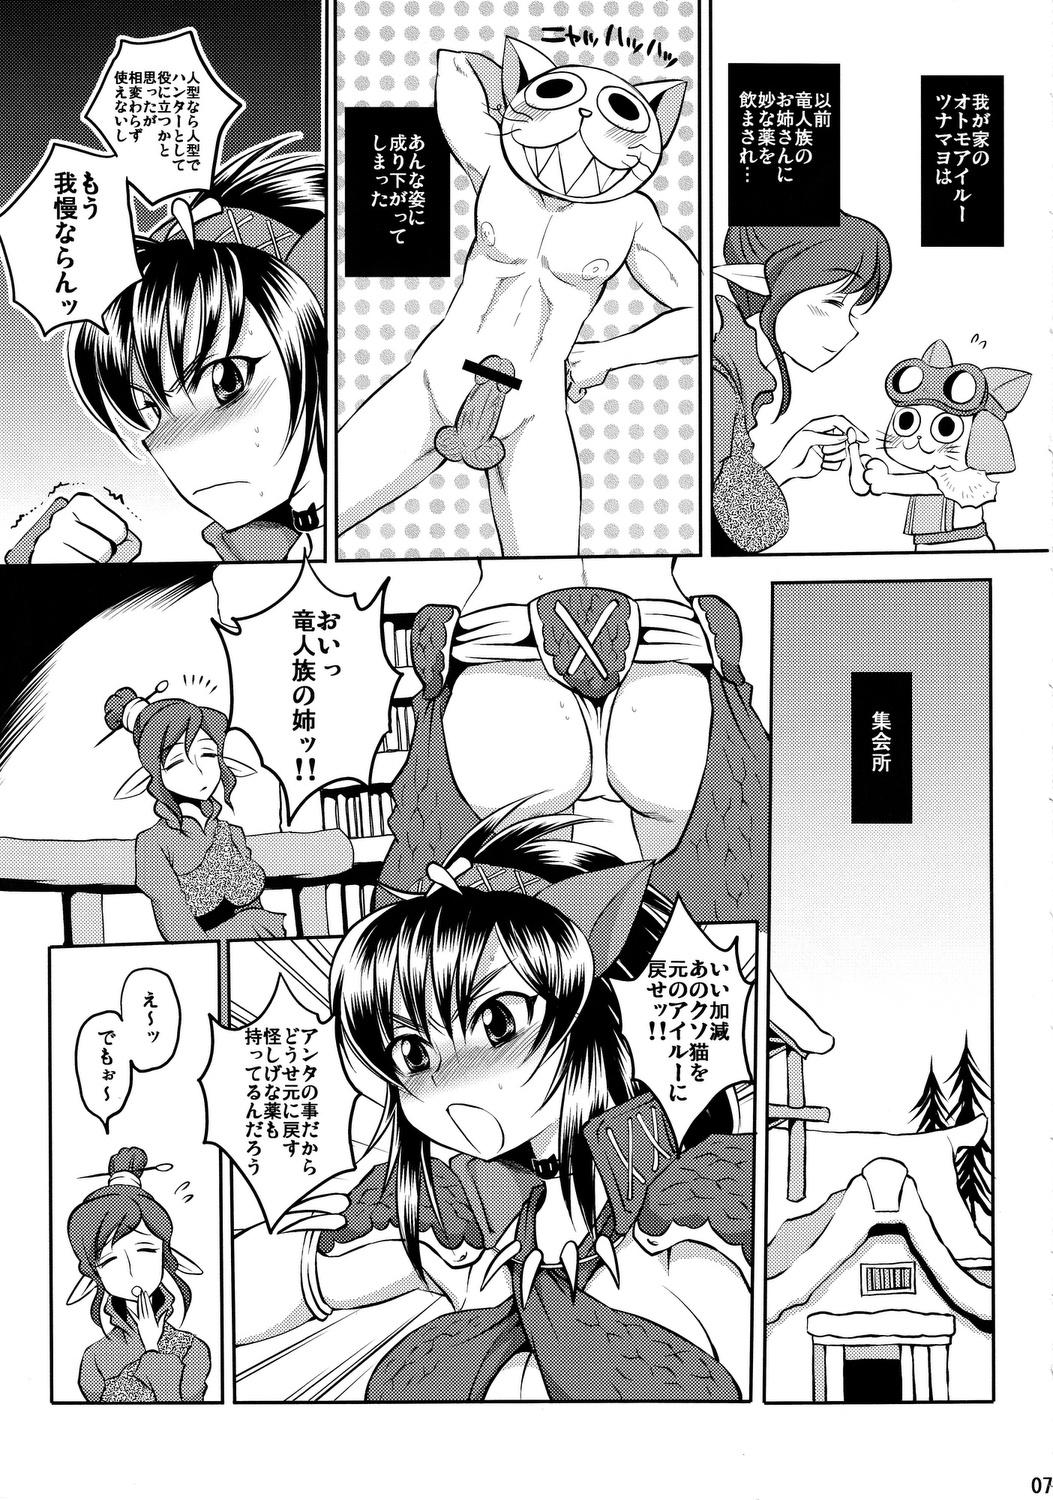 Butts Naruga-san Quest - Monster hunter Cream - Page 6